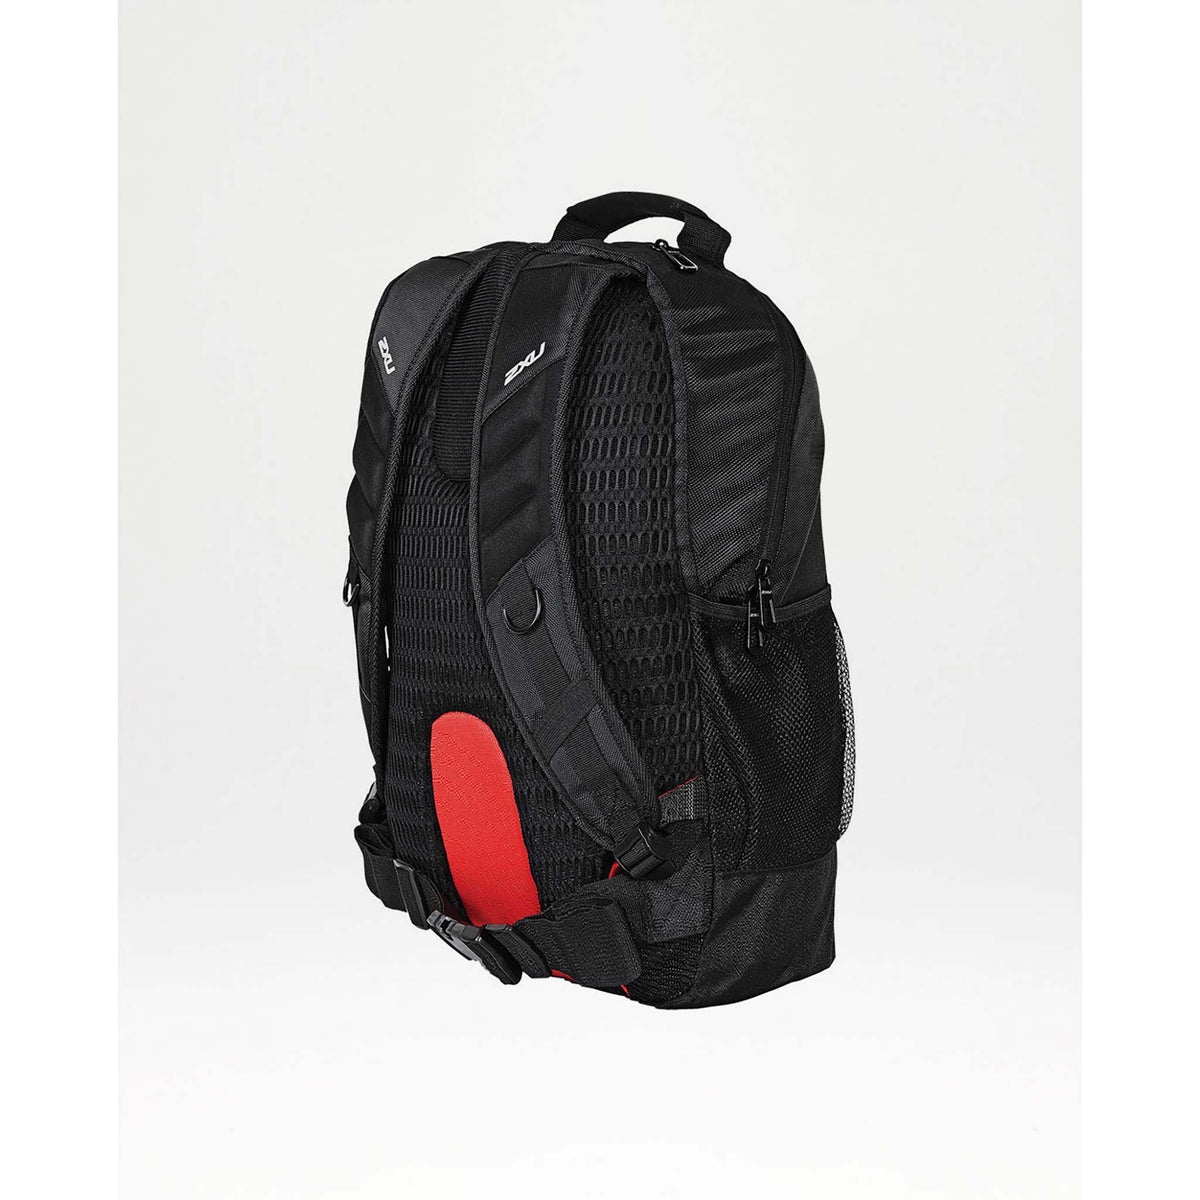 2XU Speed Backpack sac a dos sport